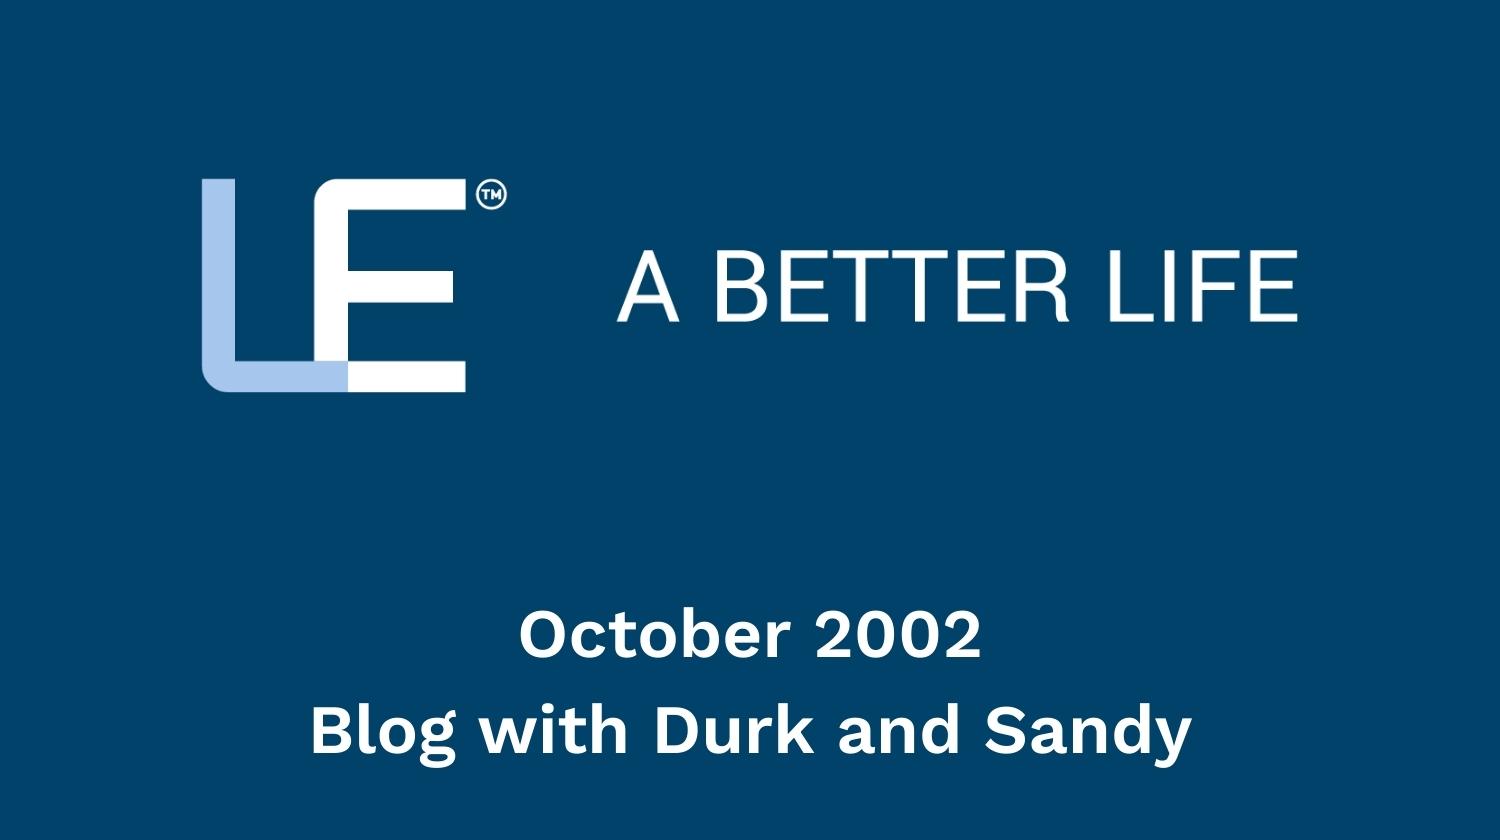 October 2002 Blog with Durk and Sandy